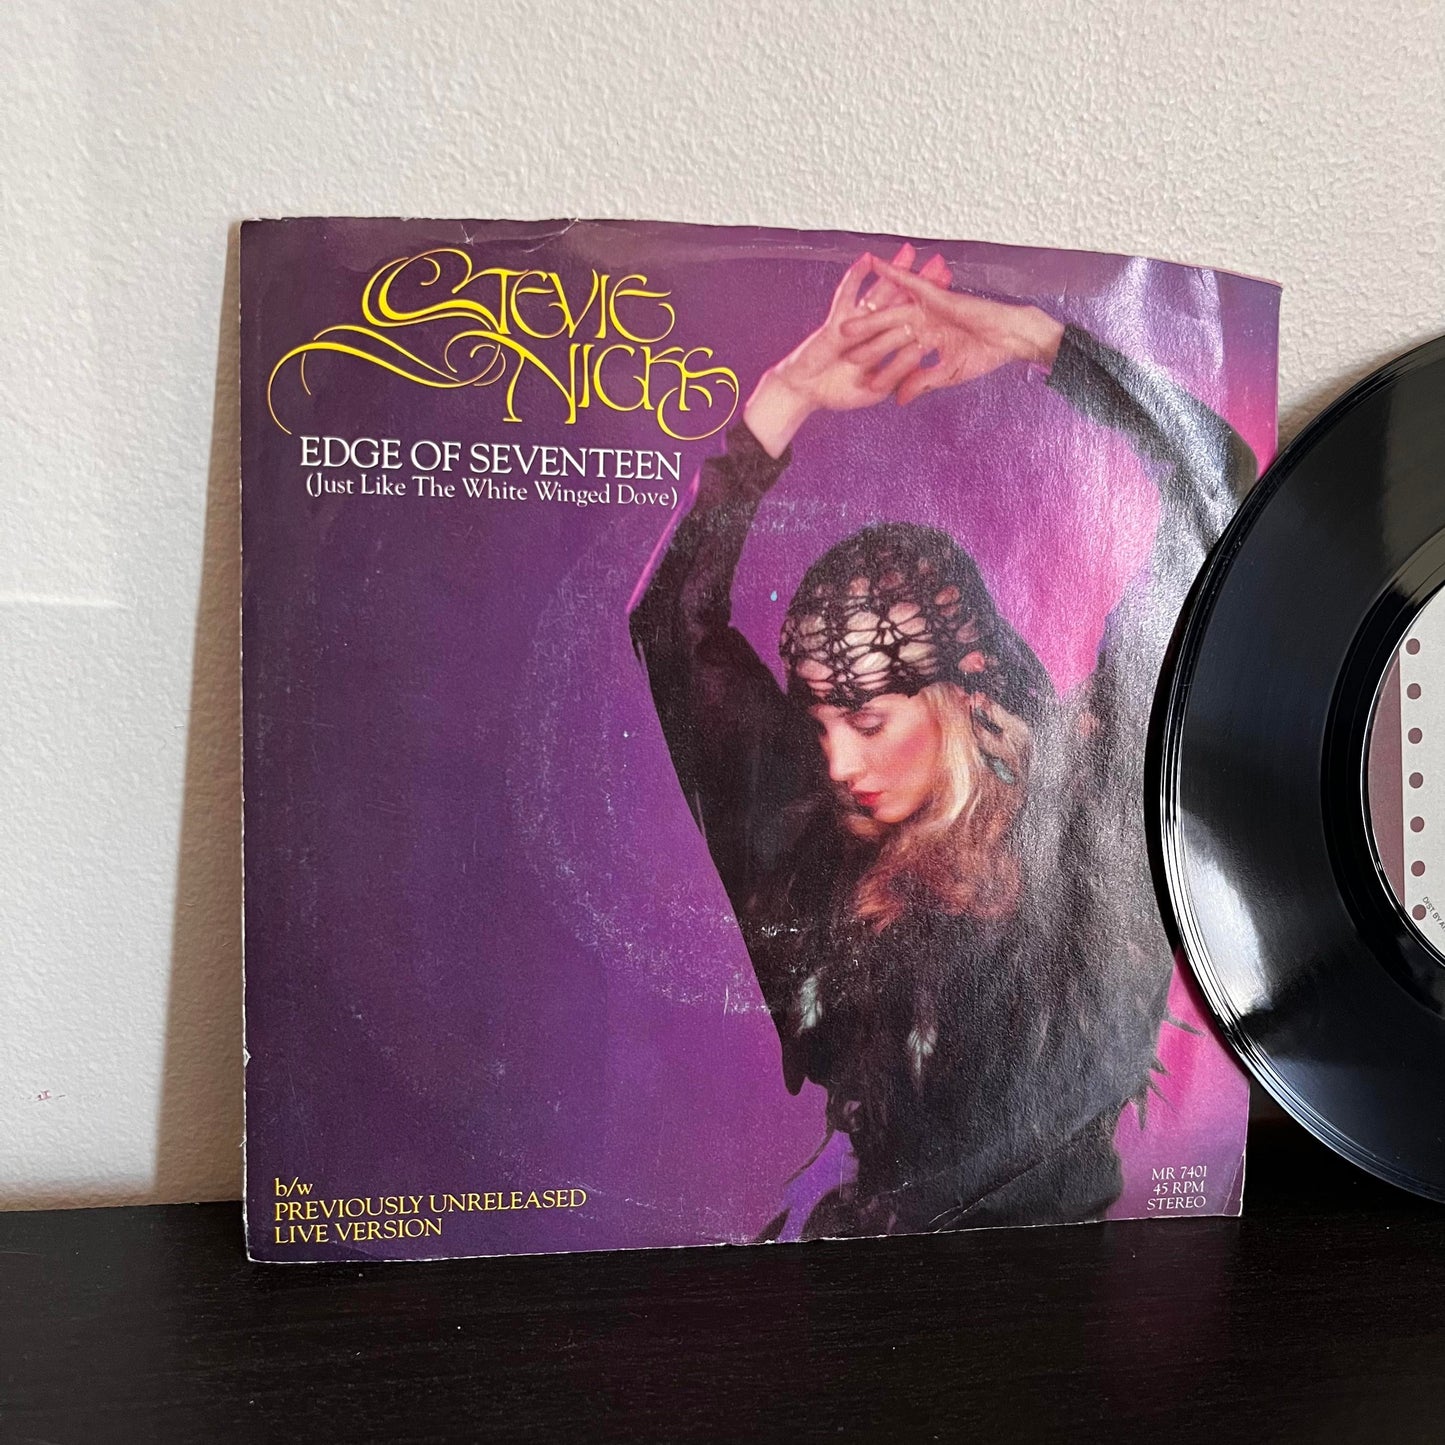 Stevie Nicks Edge Of Seventeen (Just Like The White Winged Dove)/Previously Unreleased Live Version MR 7401 7" Vinyl EX